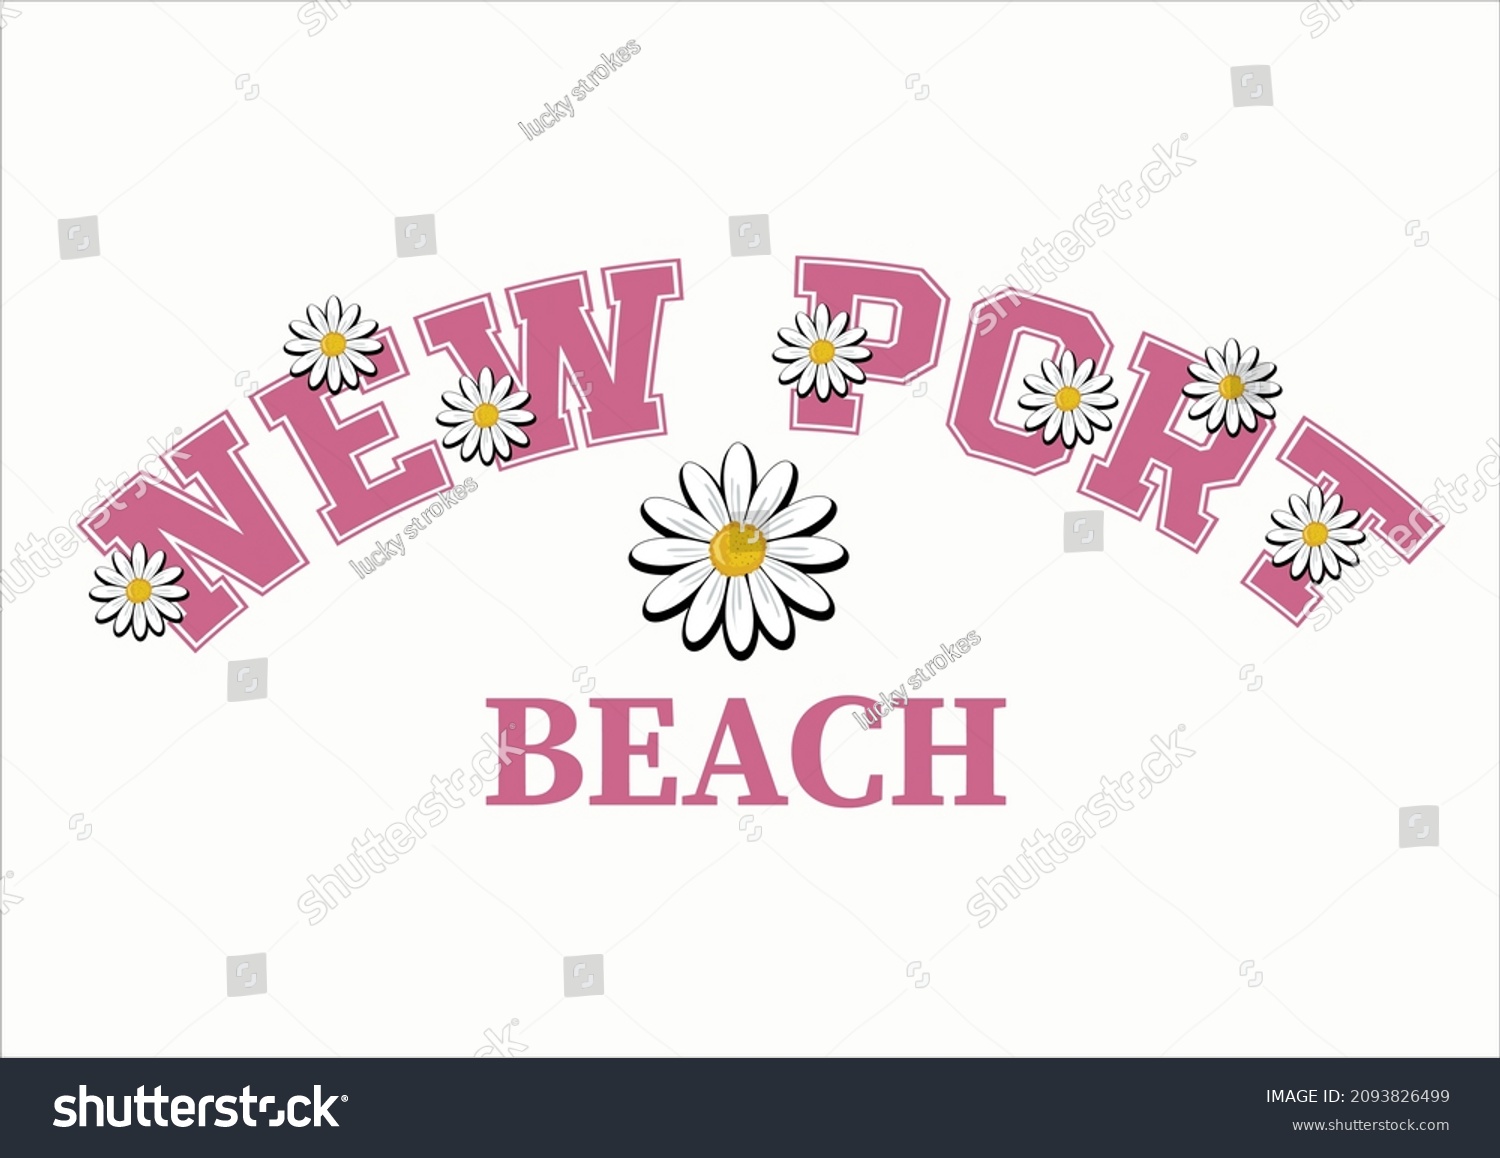 SVG of new port  beach vector design with daisy flower svg